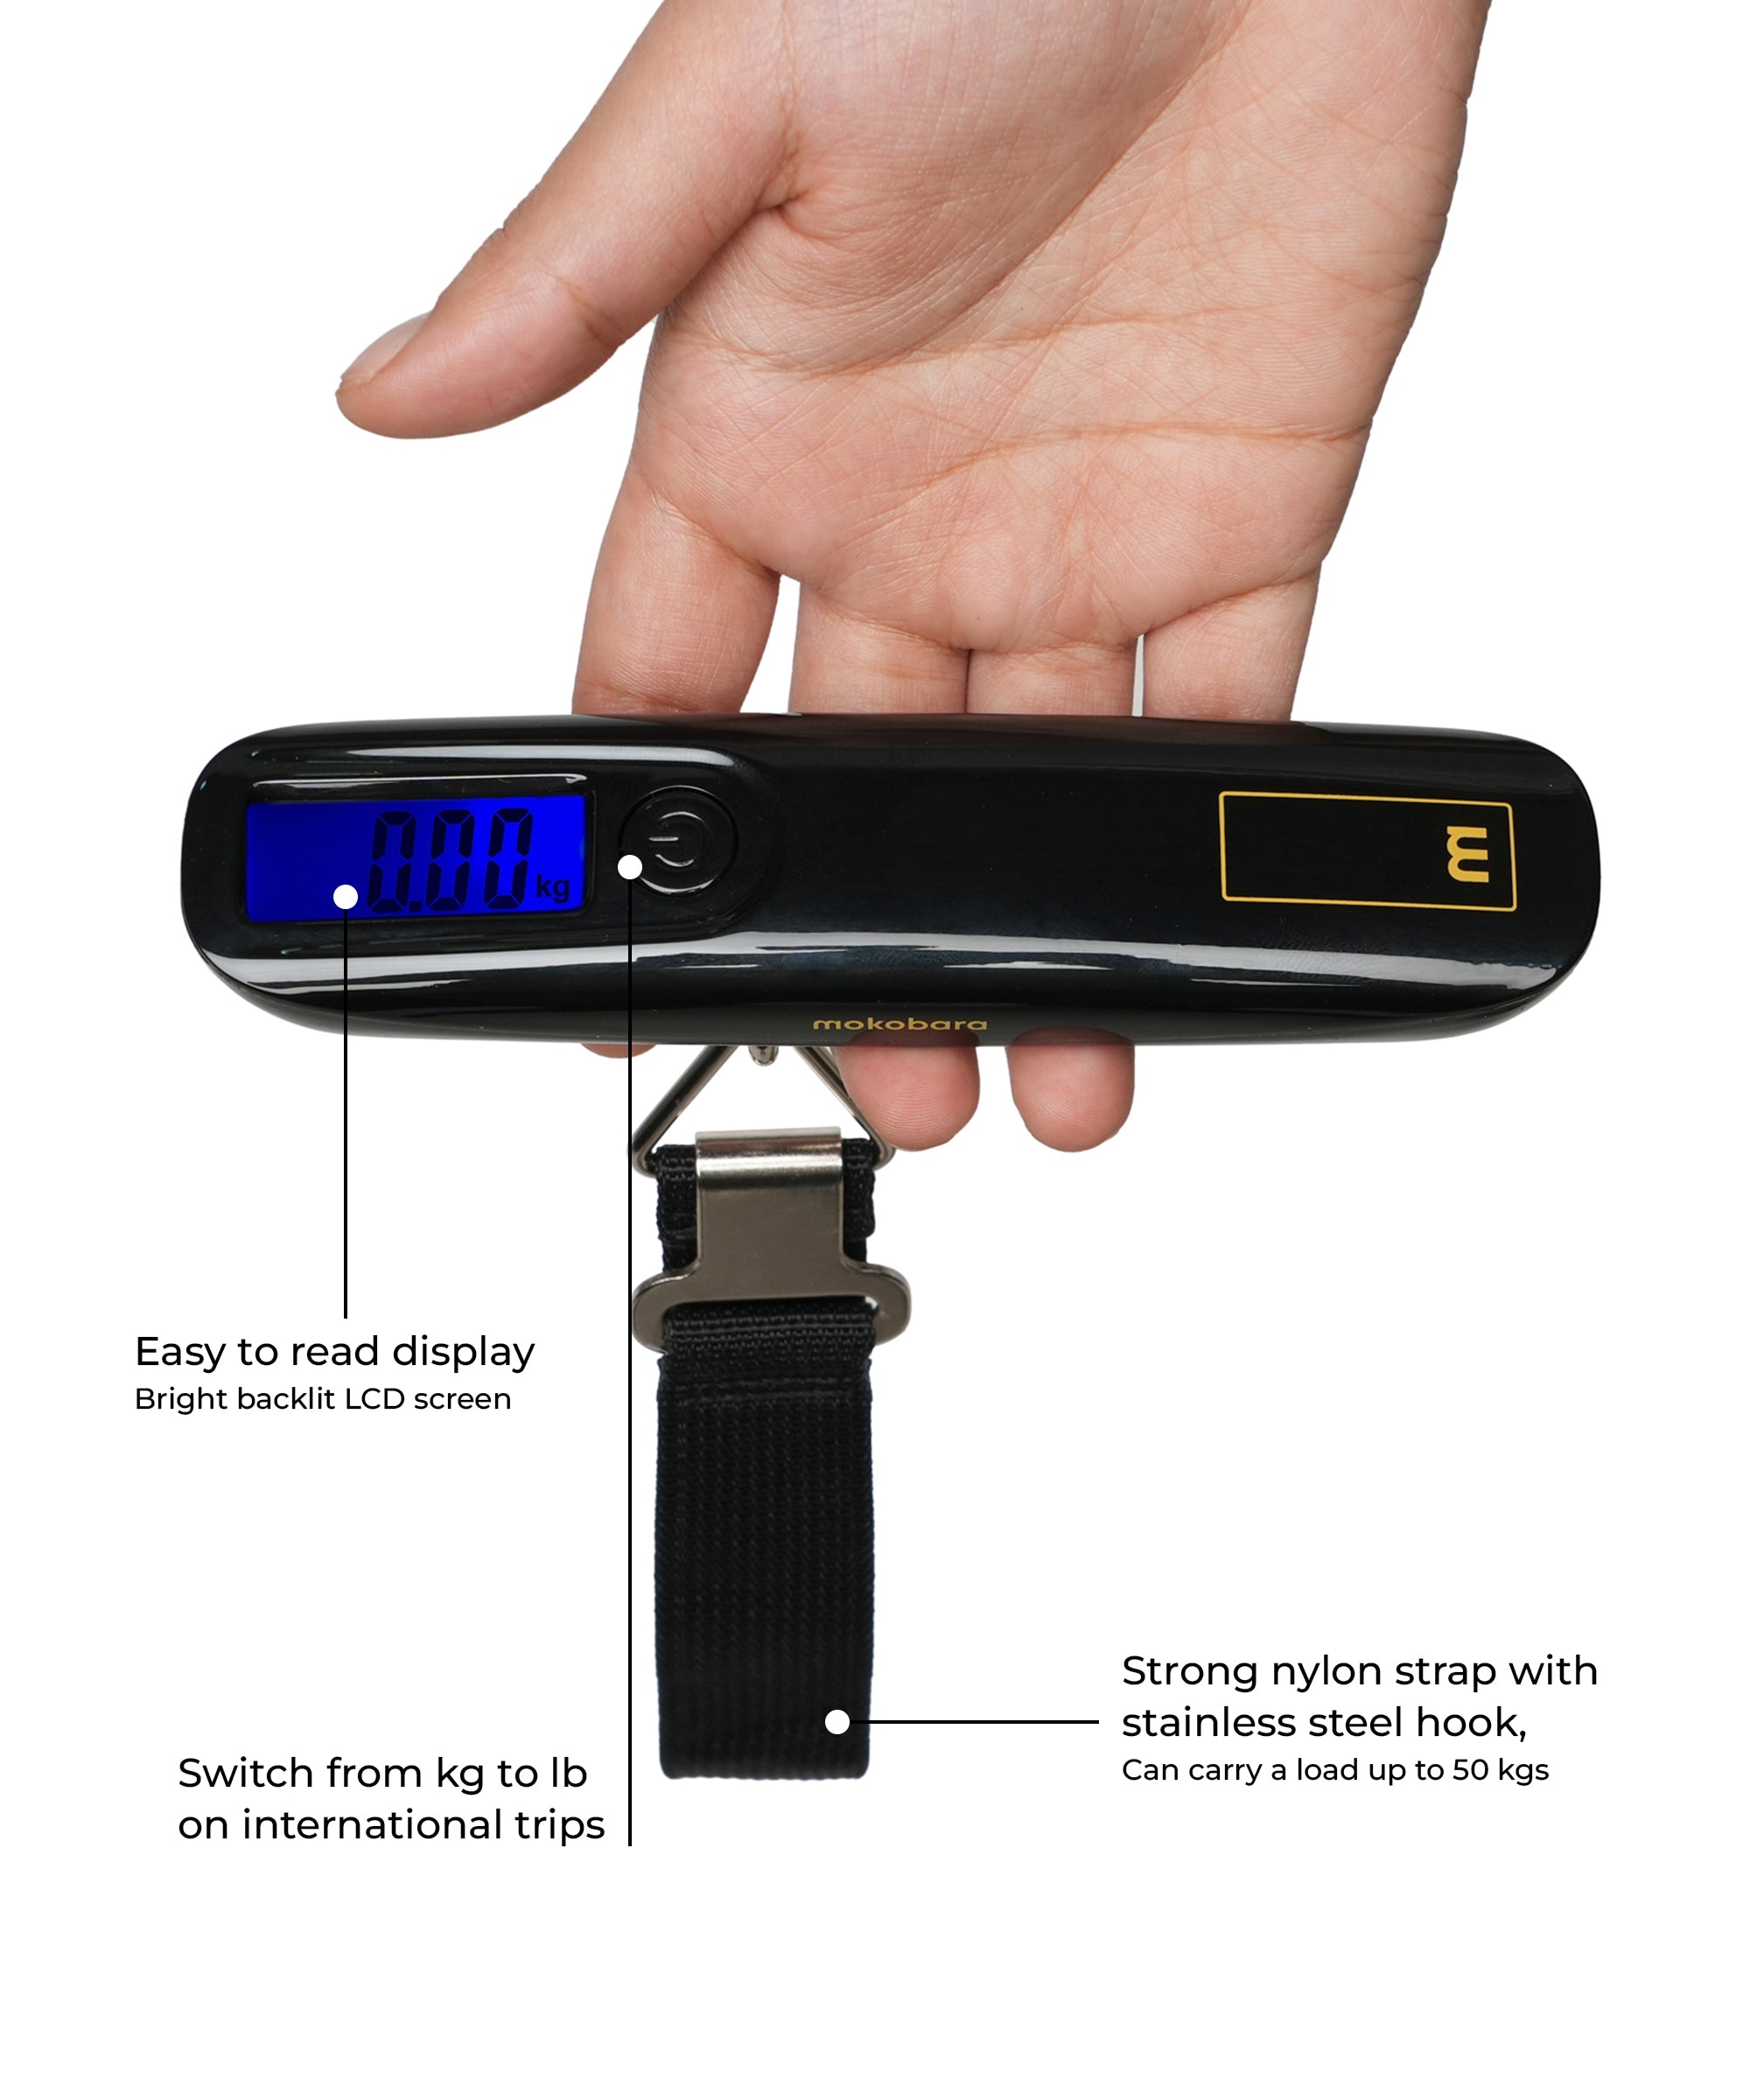  The Luggage Scale